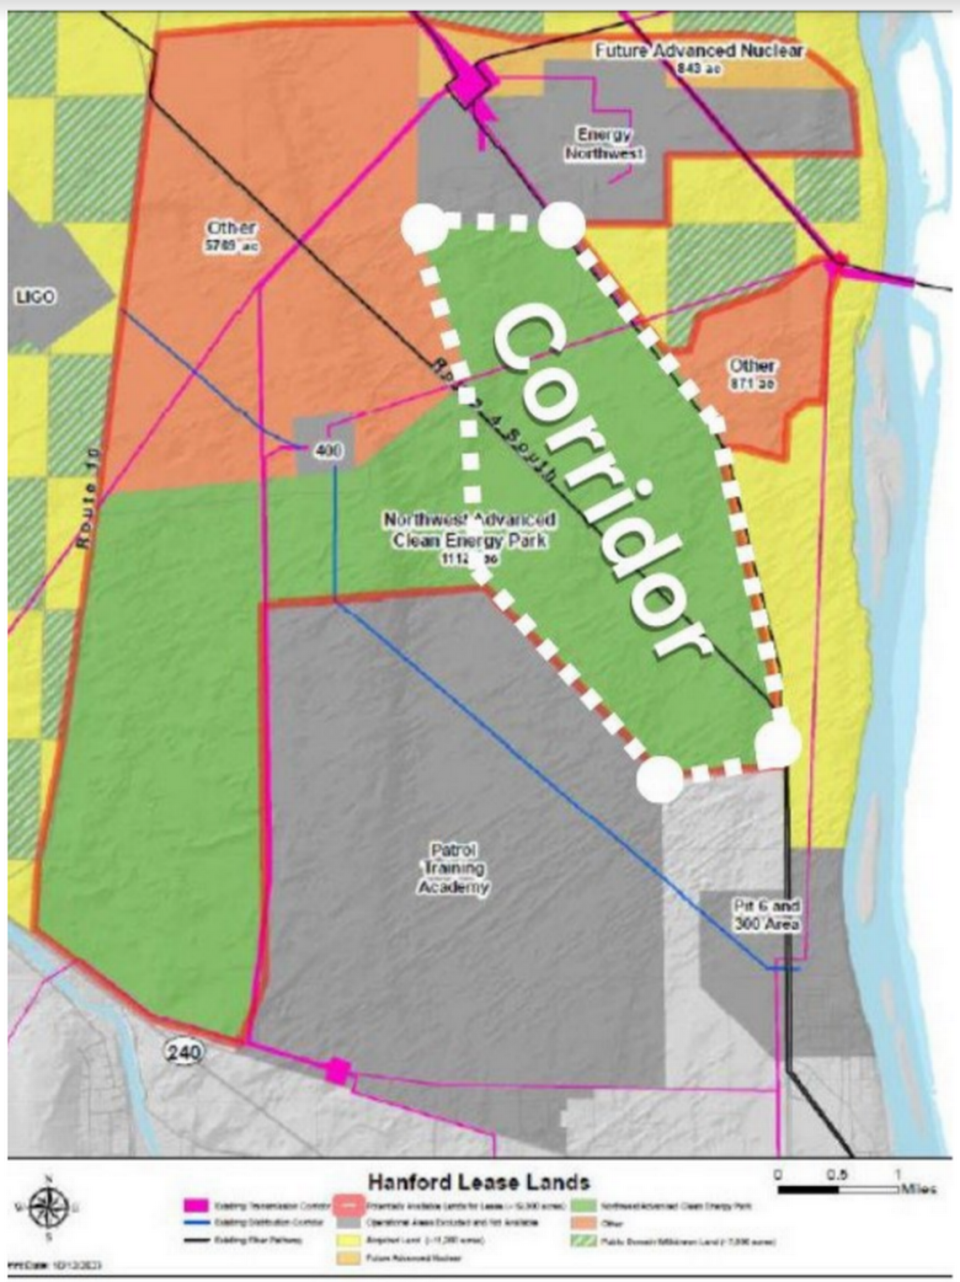 Green areas on this map of Hanford land just north of Richland show the land most important for Tri-Cities development, particularly the area marked as “Corridor,” according to the Tri-City Development Council.